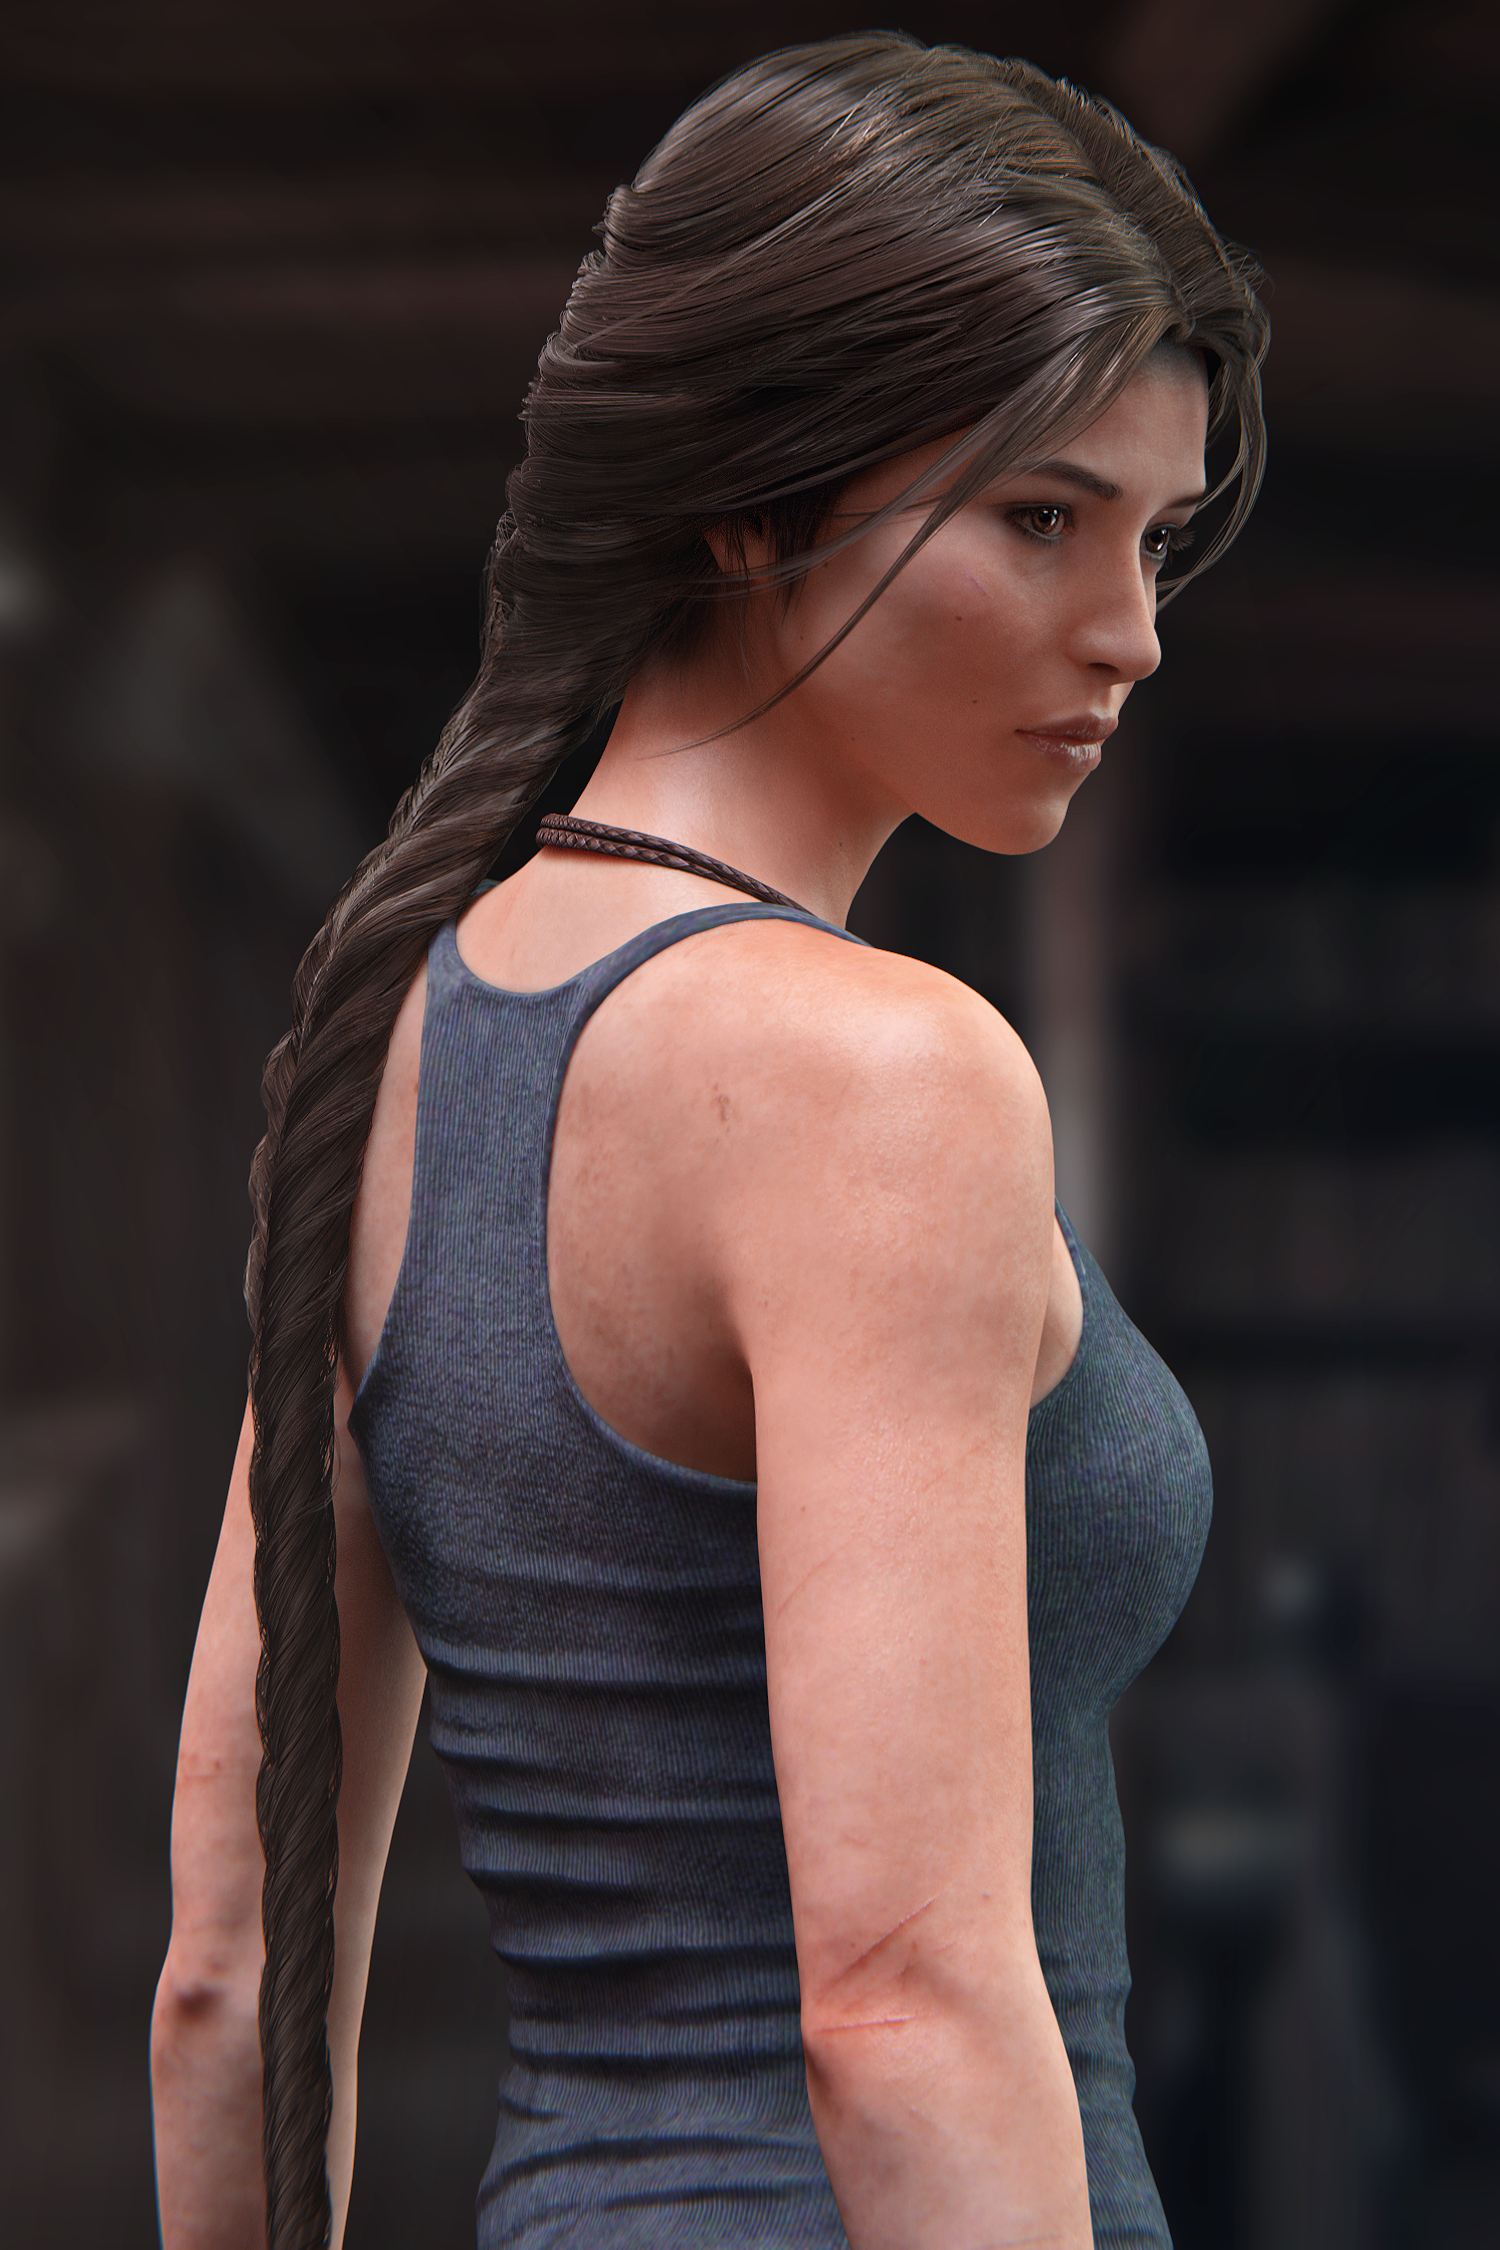 Rise of the Tomb Raider Lara nude mod - Page 10 - Adult 